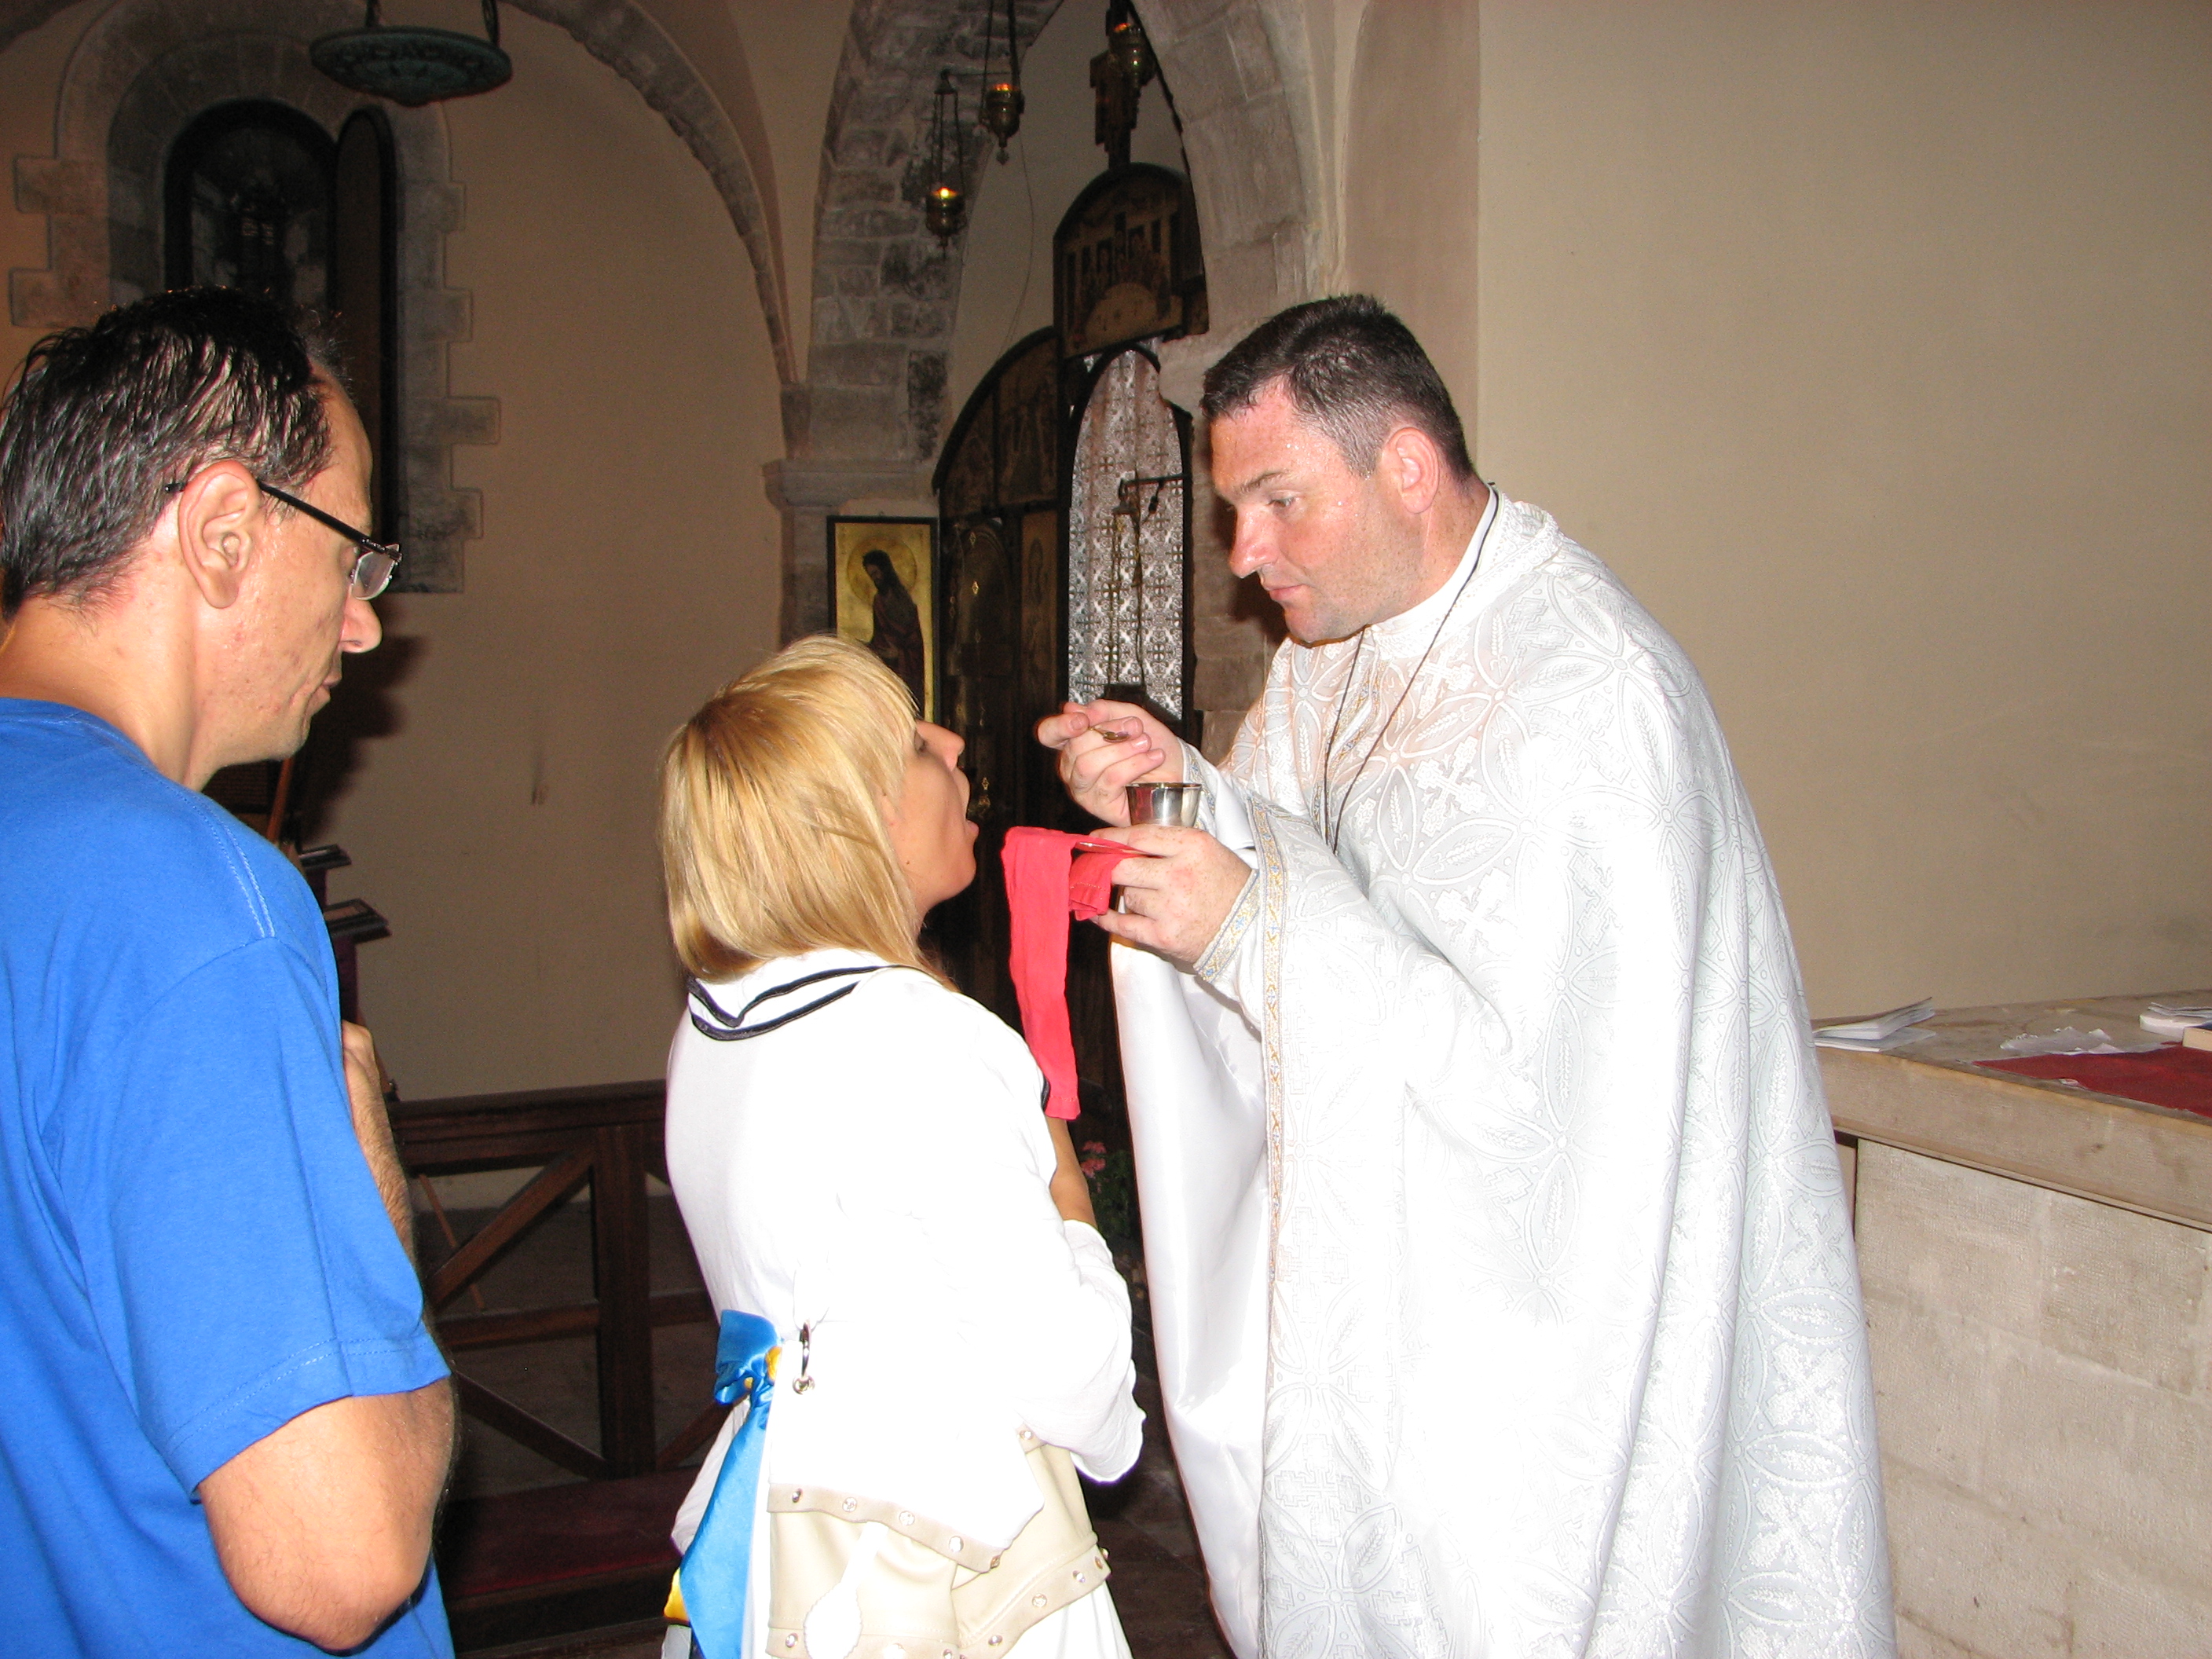 A young woman taking the Holy Communion from a Greek-Catholic priest, Italy, summer 2011